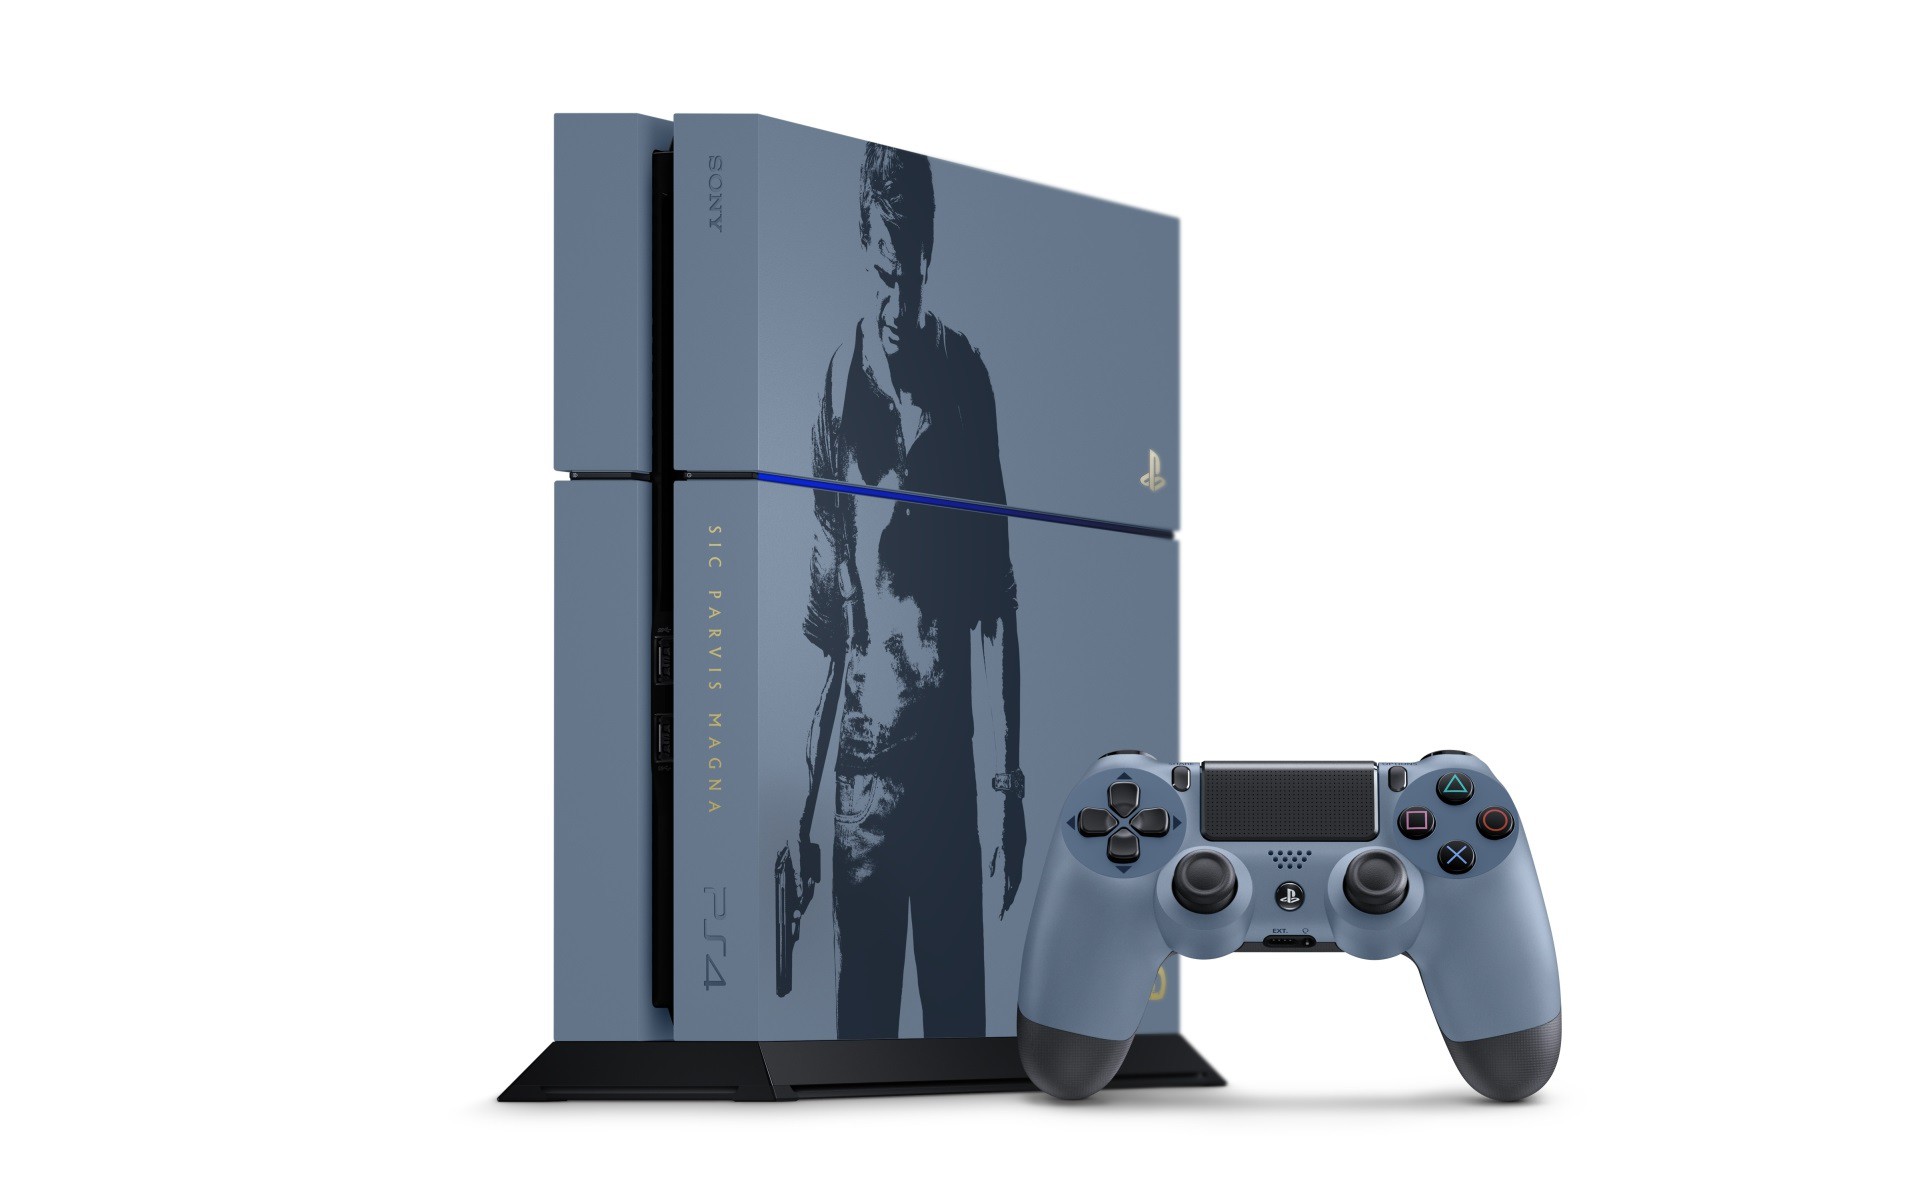 Ps4 ultimate edition. Ps4 Uncharted 4 Limited. Ps4 Uncharted 4 Limited Edition. Uncharted 4 ps4. PLAYSTATION 4 Uncharted Edition.